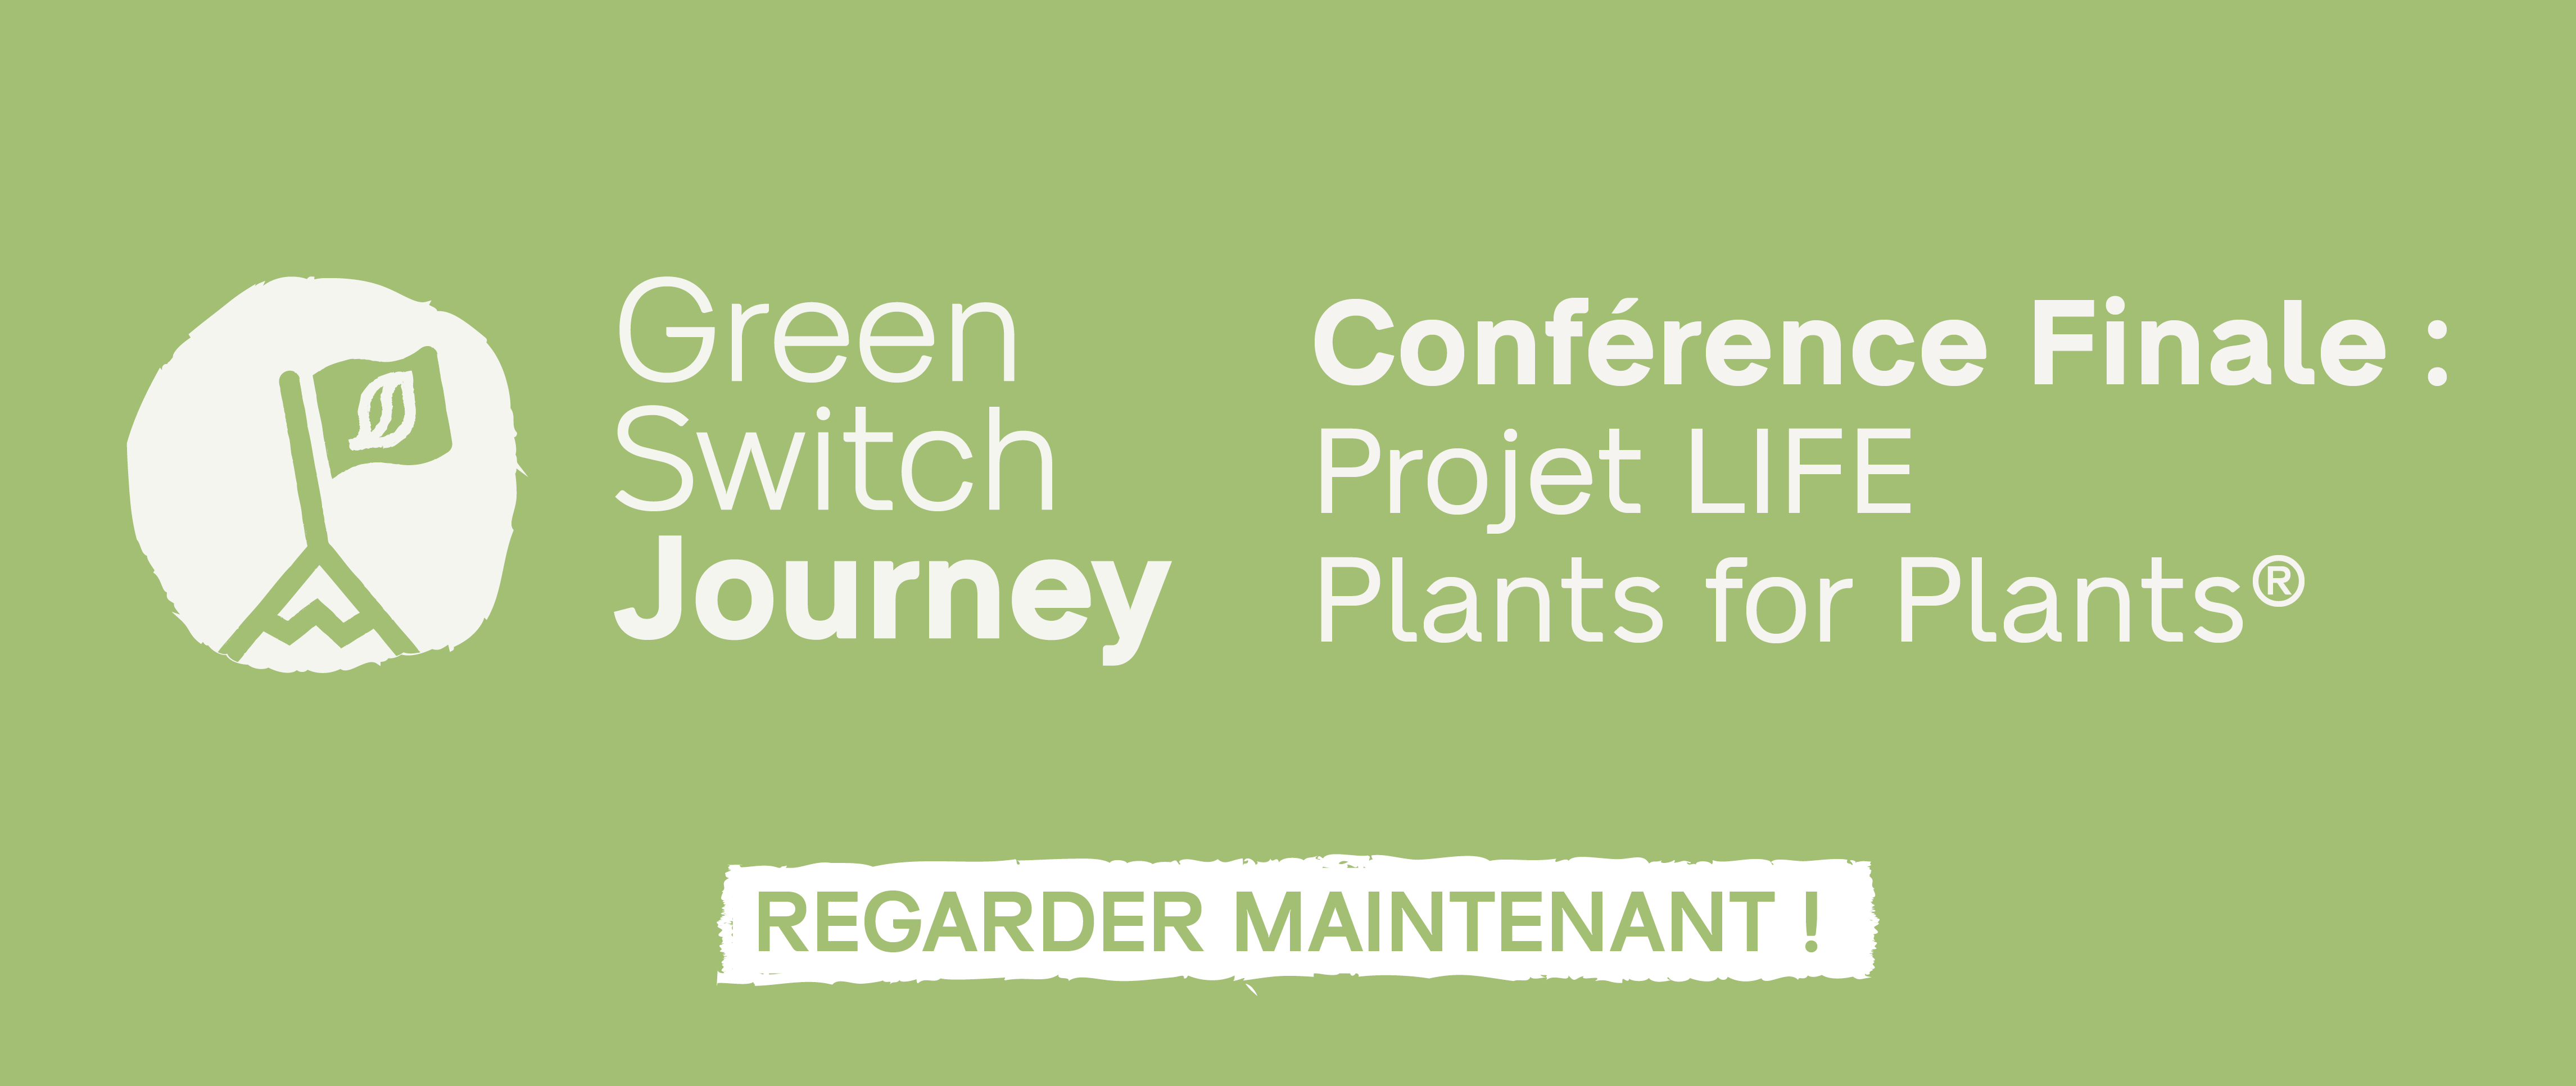 https://www.vaniperen.com/fr/wp-content/uploads/sites/2/2022/06/VII-FR-banner-Green-Switch-Journey-Final-Conference-P4P-watch-now.png